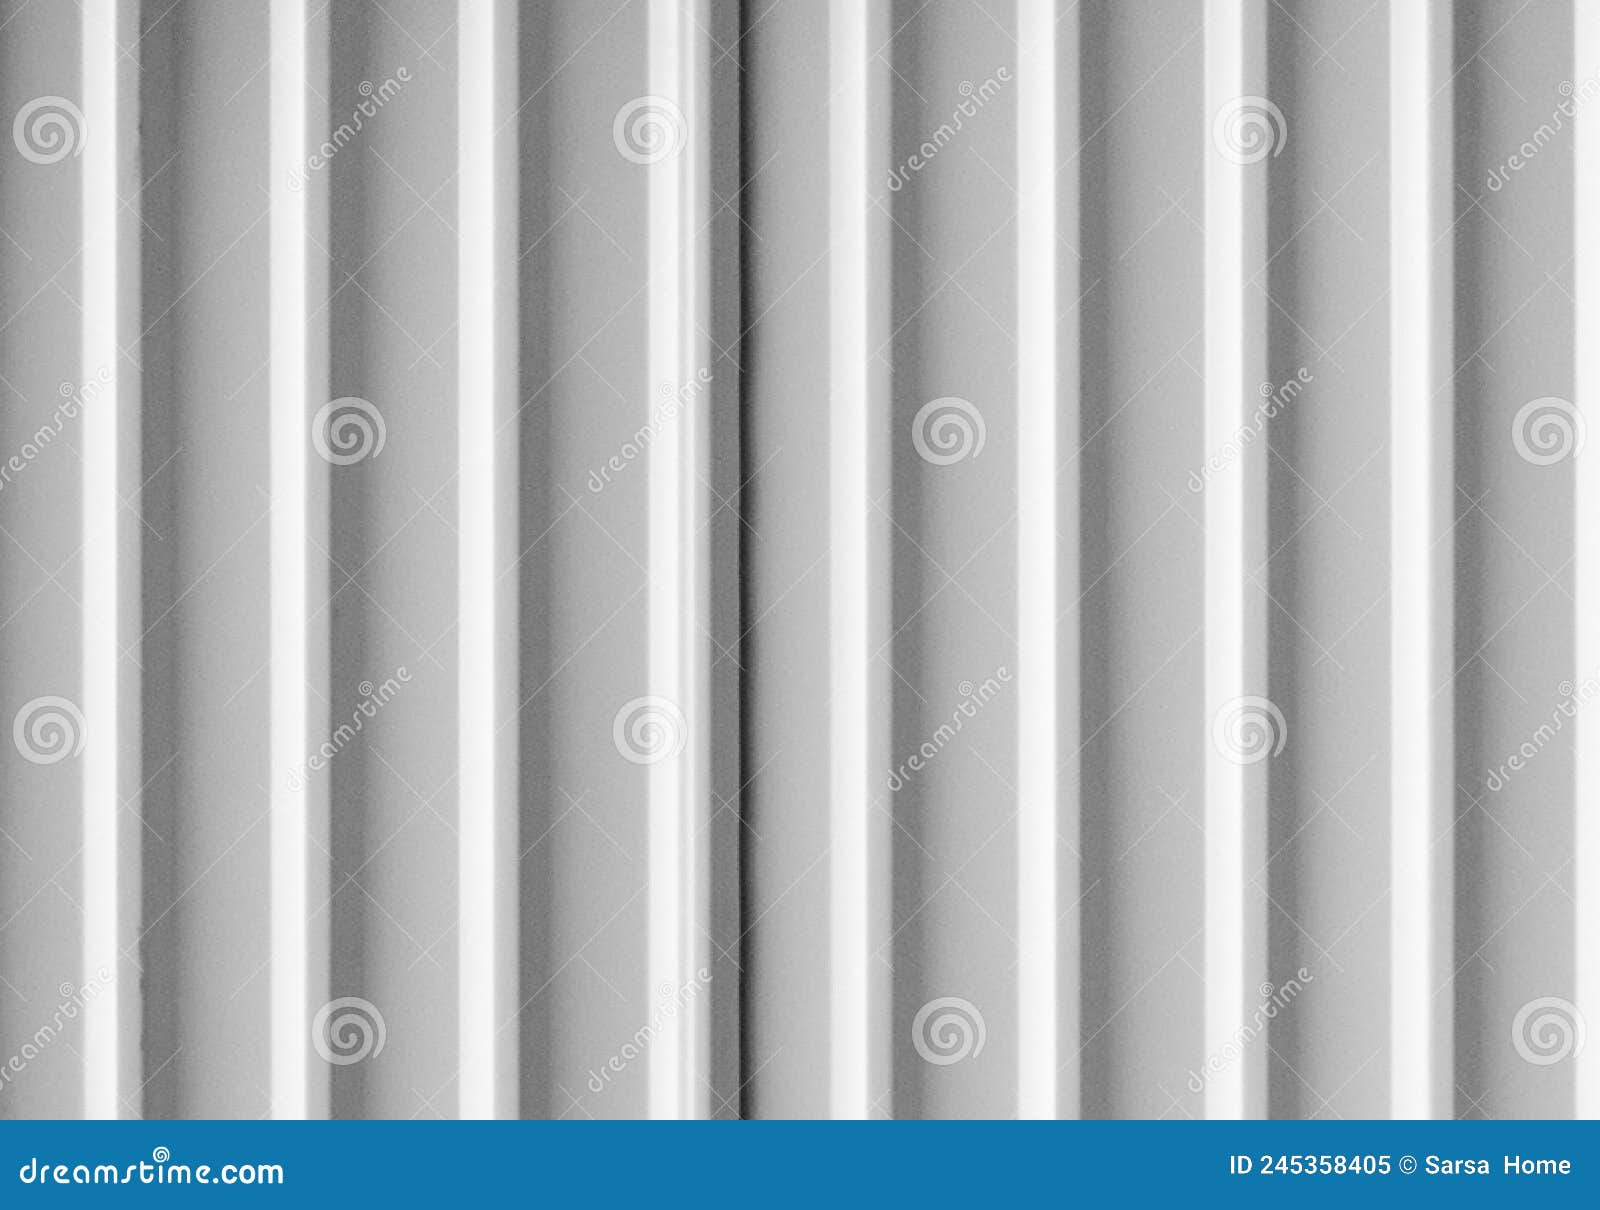 white metal background image of a container that can be used as a background